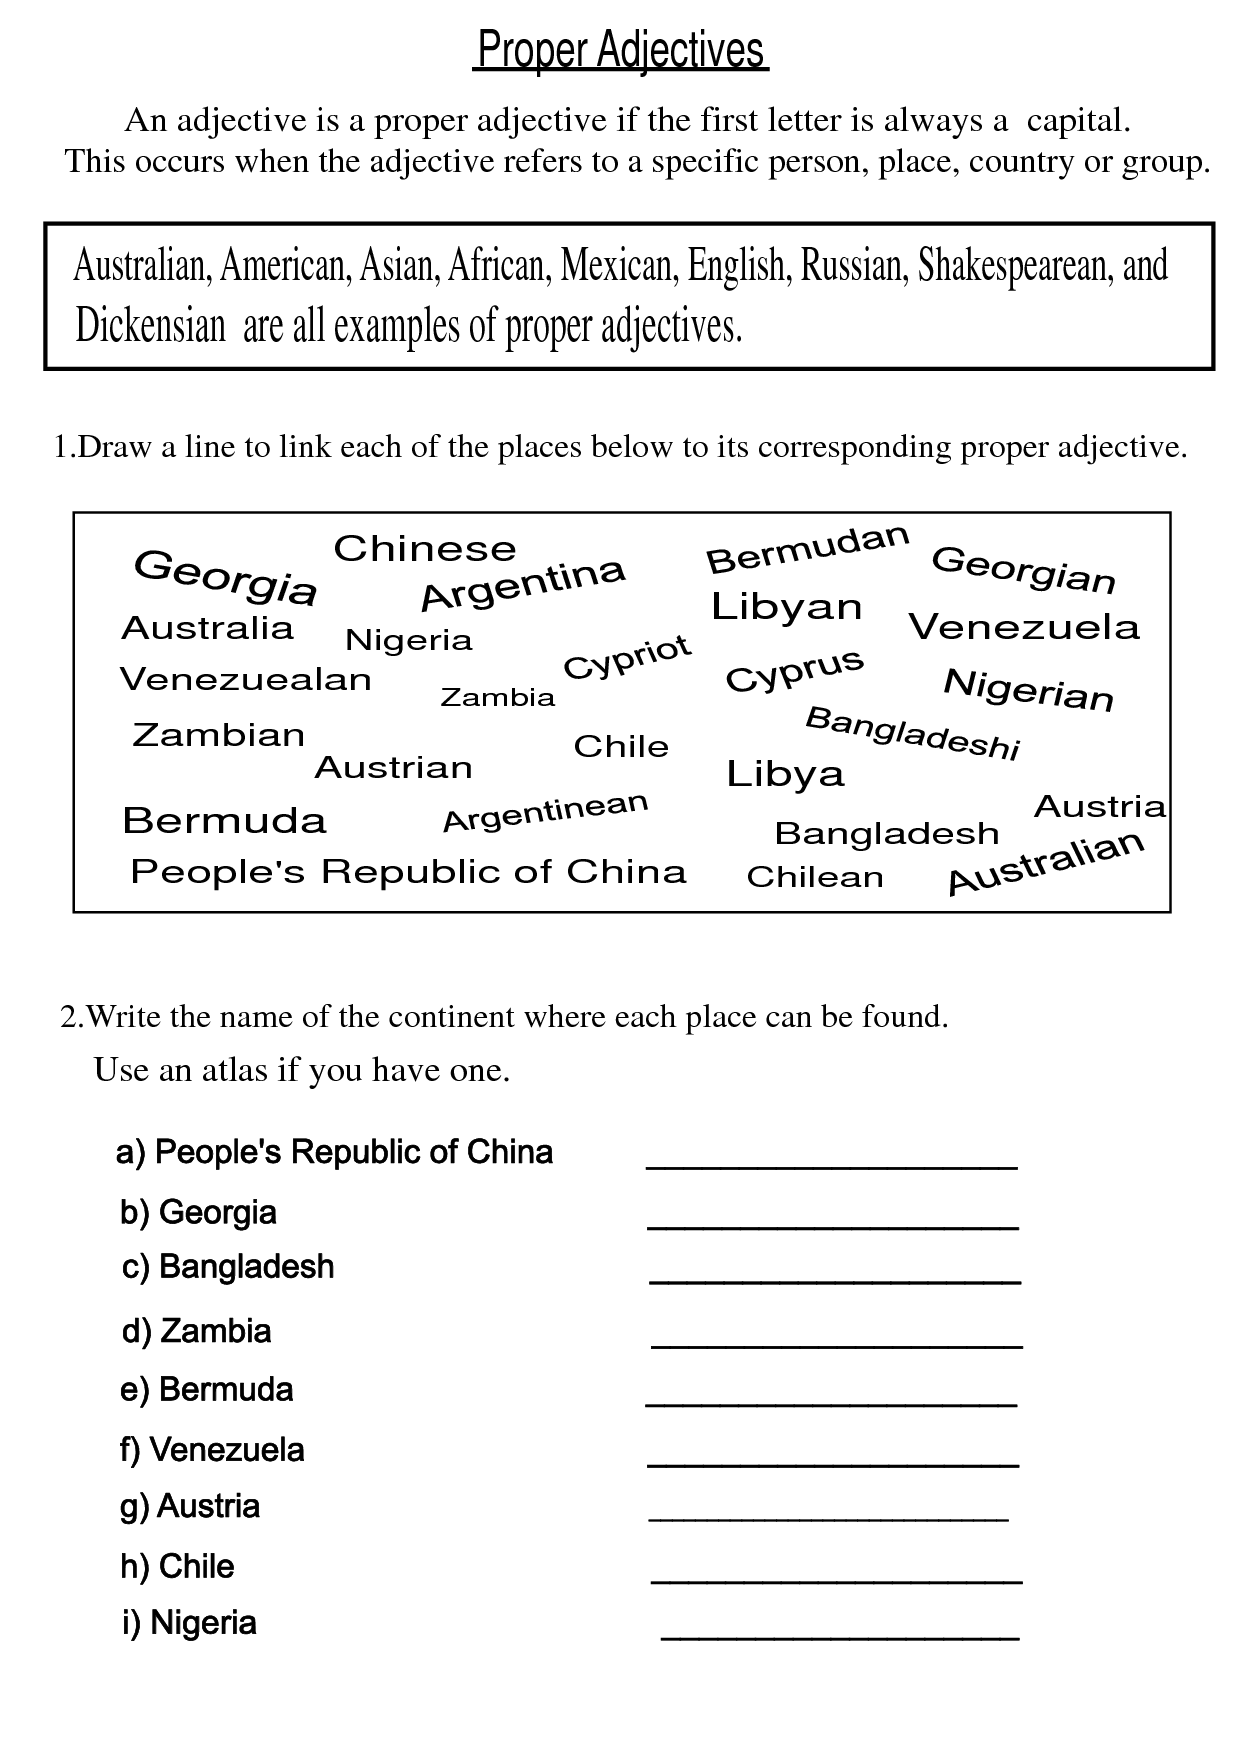 15-best-images-of-5th-grade-adjective-worksheets-adjective-worksheets